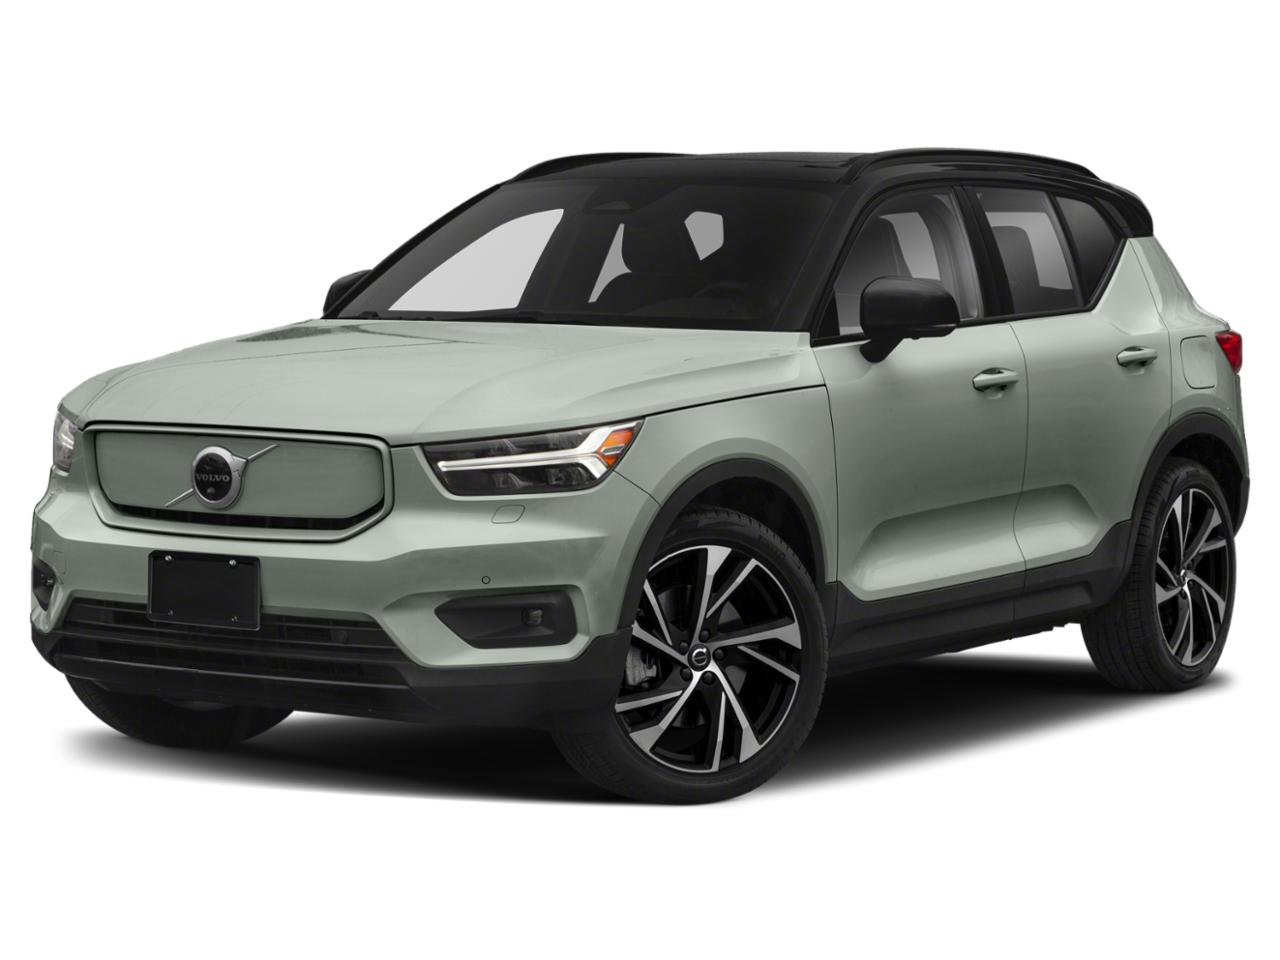 2022 Volvo XC40 Recharge Pure Electric Vehicle Photo in Appleton, WI 54913